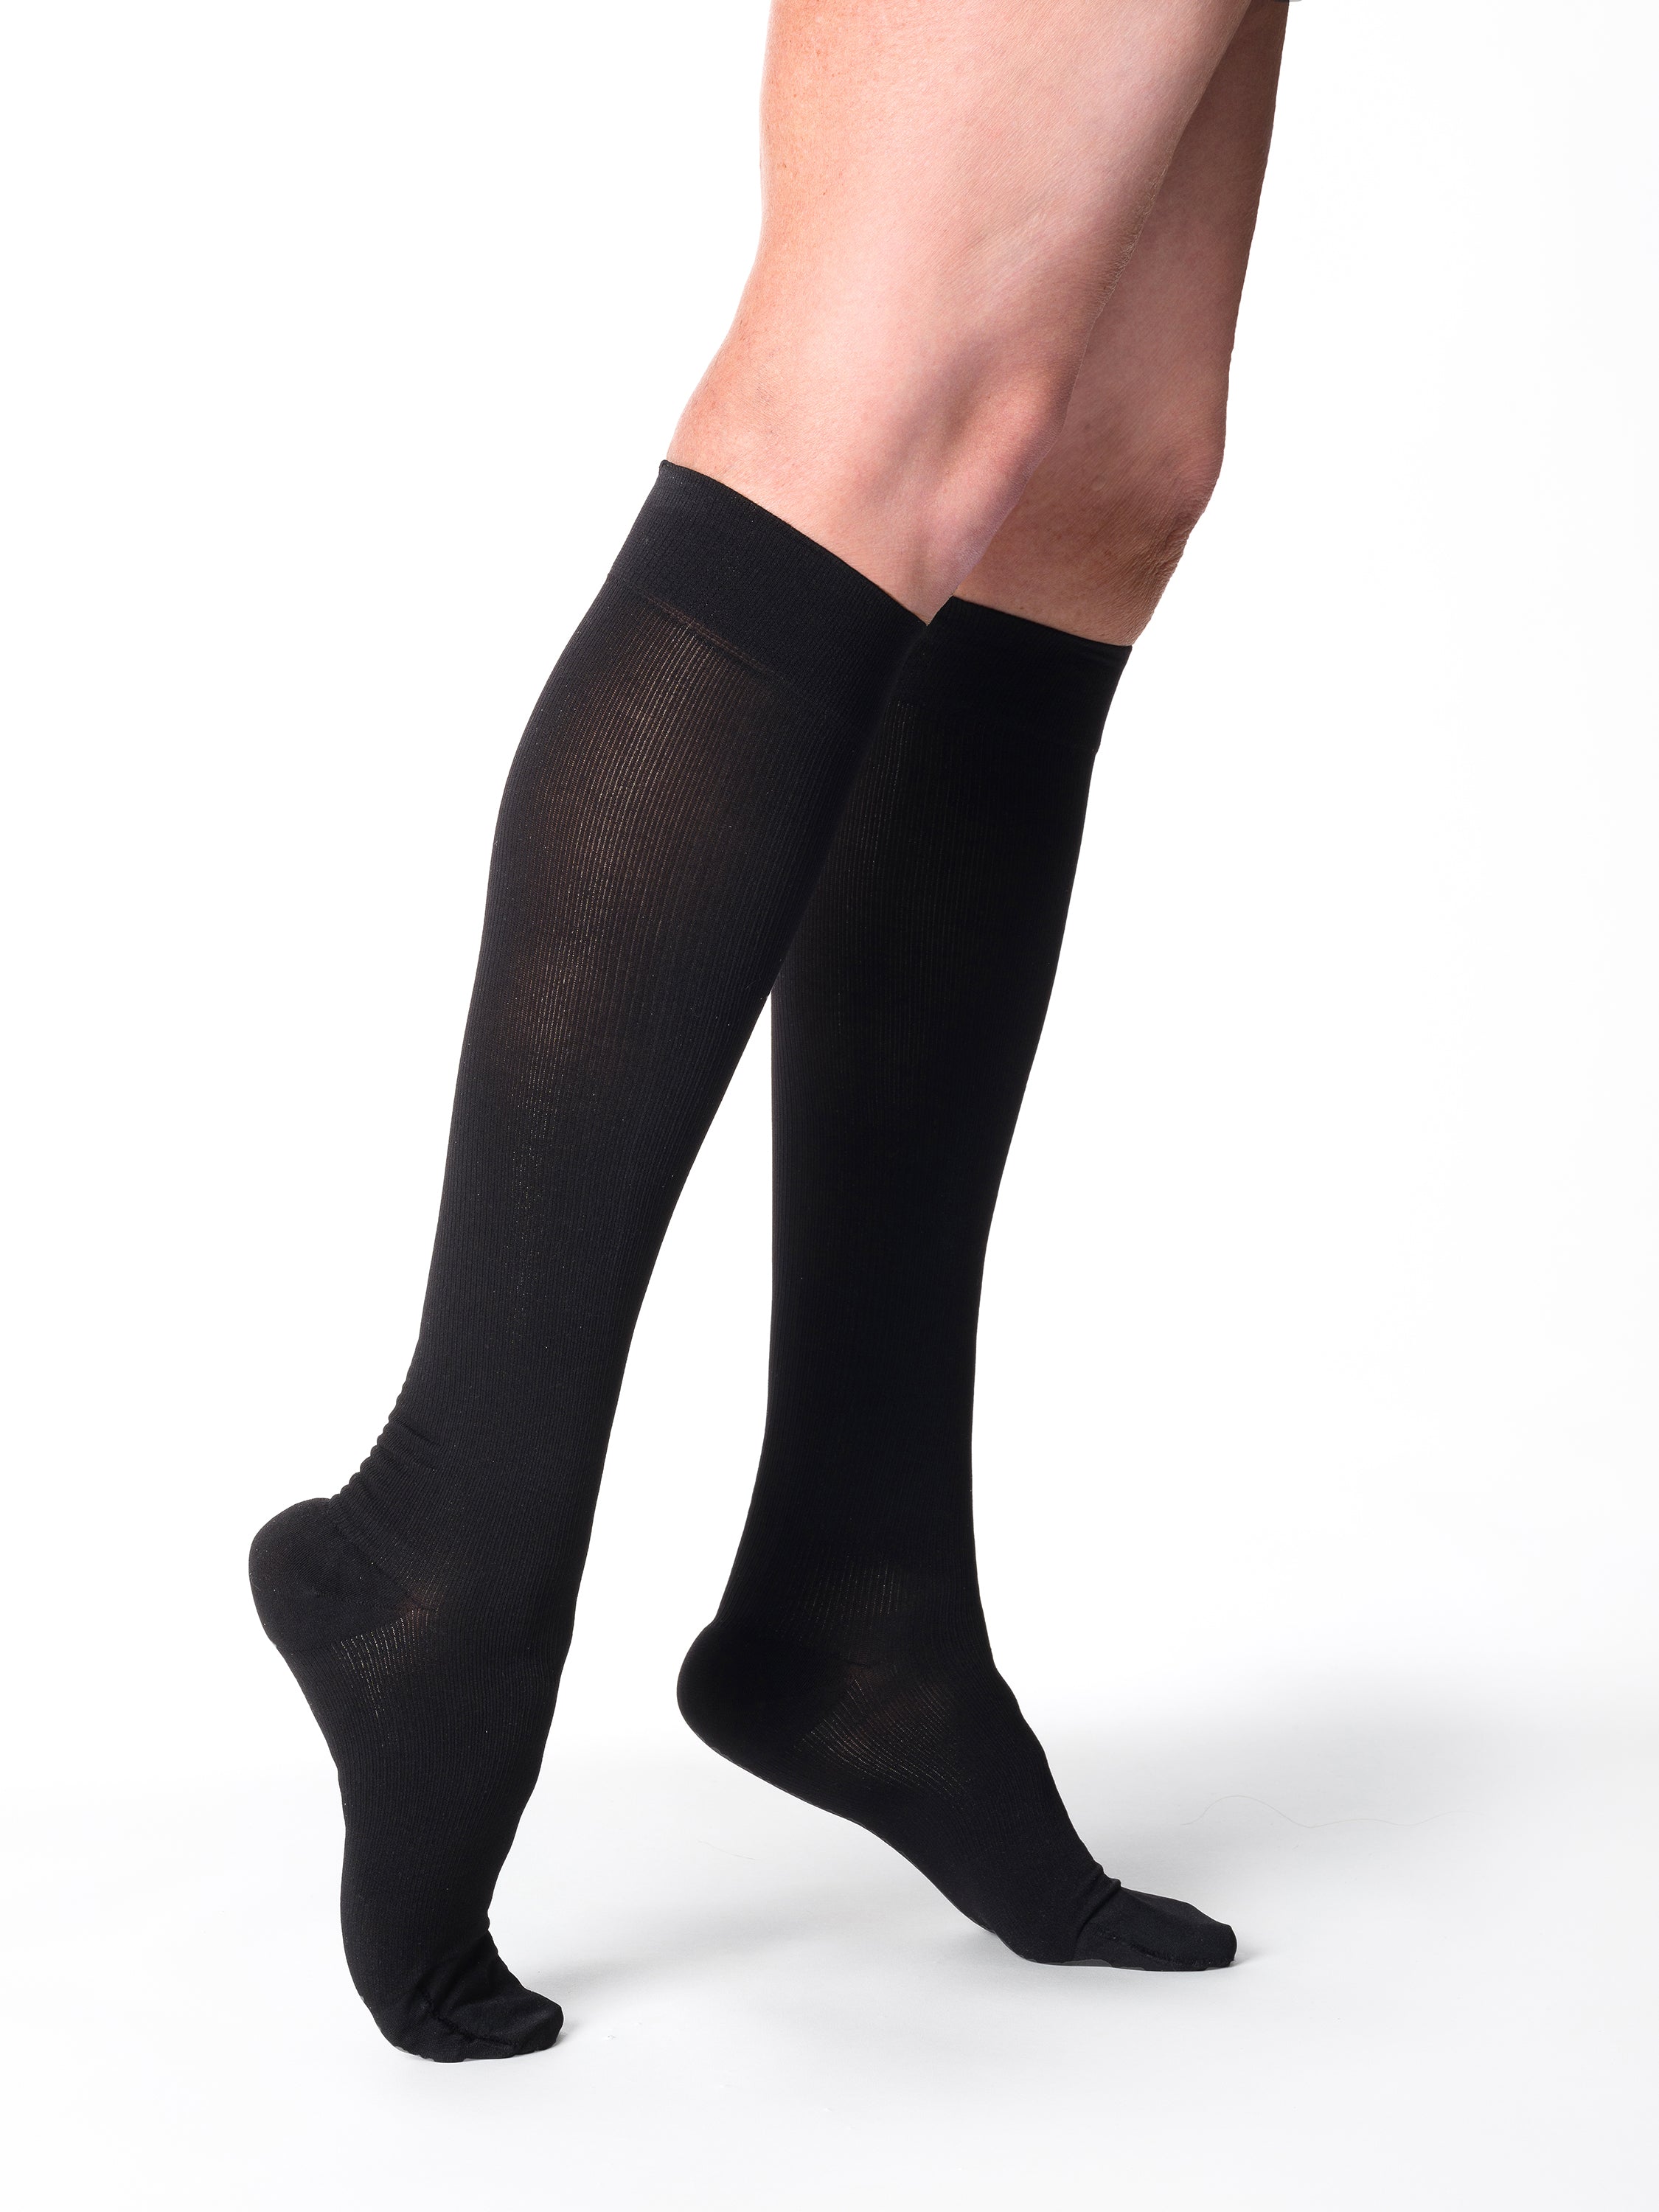 Woman wearing Sigvaris Essential Cotton compression knee-highs in the color Black